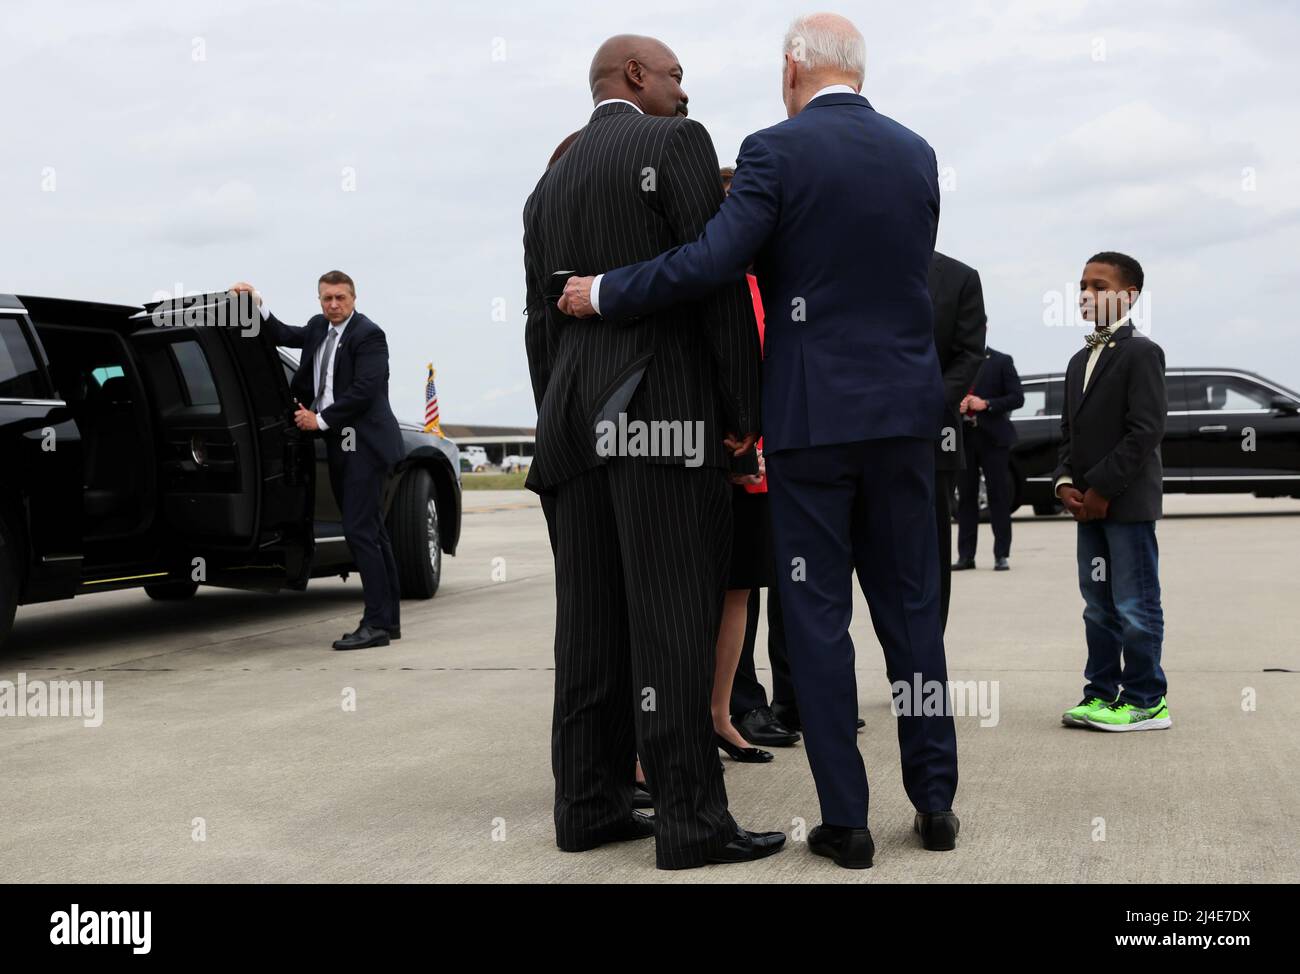 U.S. President Joe Biden greets Melvin “Skip” Alston, Chair of Guilford County Board of Commissioners, as he arrives at Piedmont Triad International Airport in Greensboro, North Carolina, U.S., April 14, 2022. REUTERS/Leah Millis Stock Photo